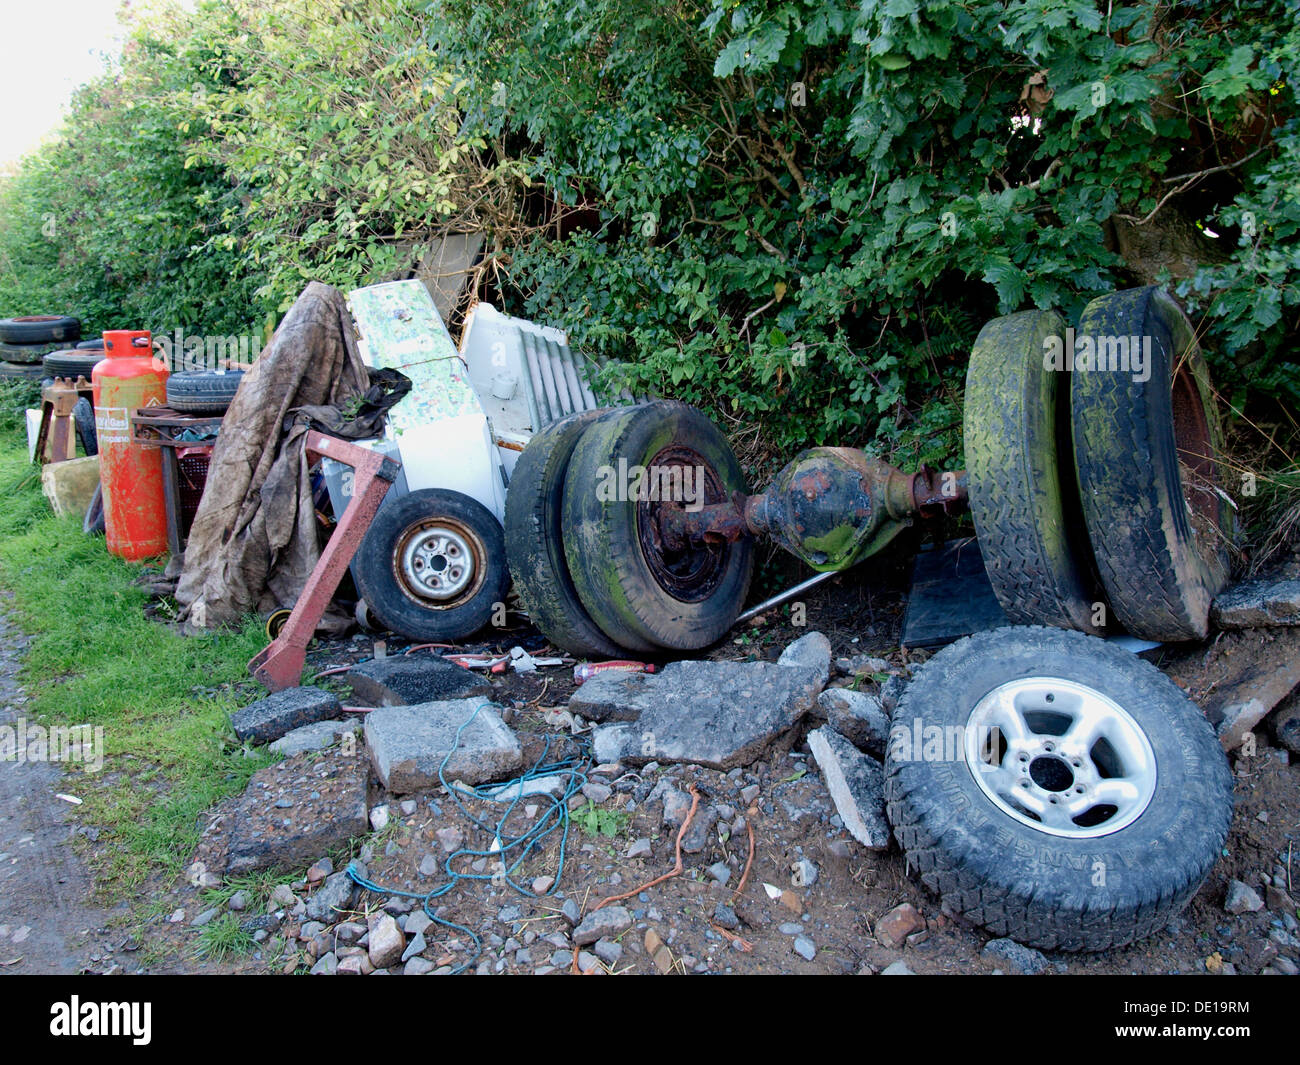 Old scrape tires and rubbish on the side of a farm track, Cornwall, UK 2013 Stock Photo